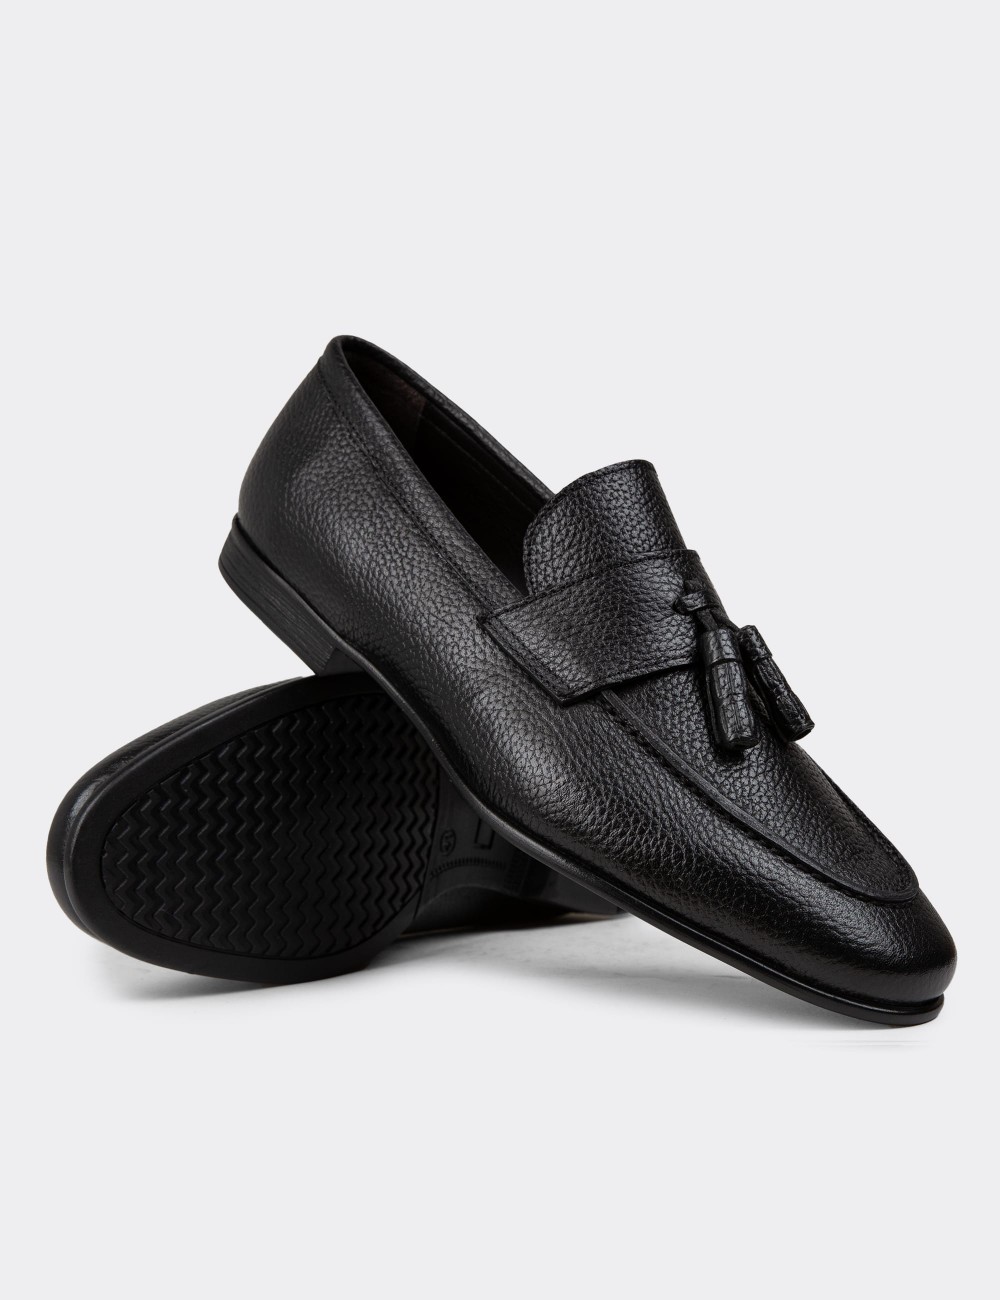 Black Leather Loafers - 01989MSYHC01